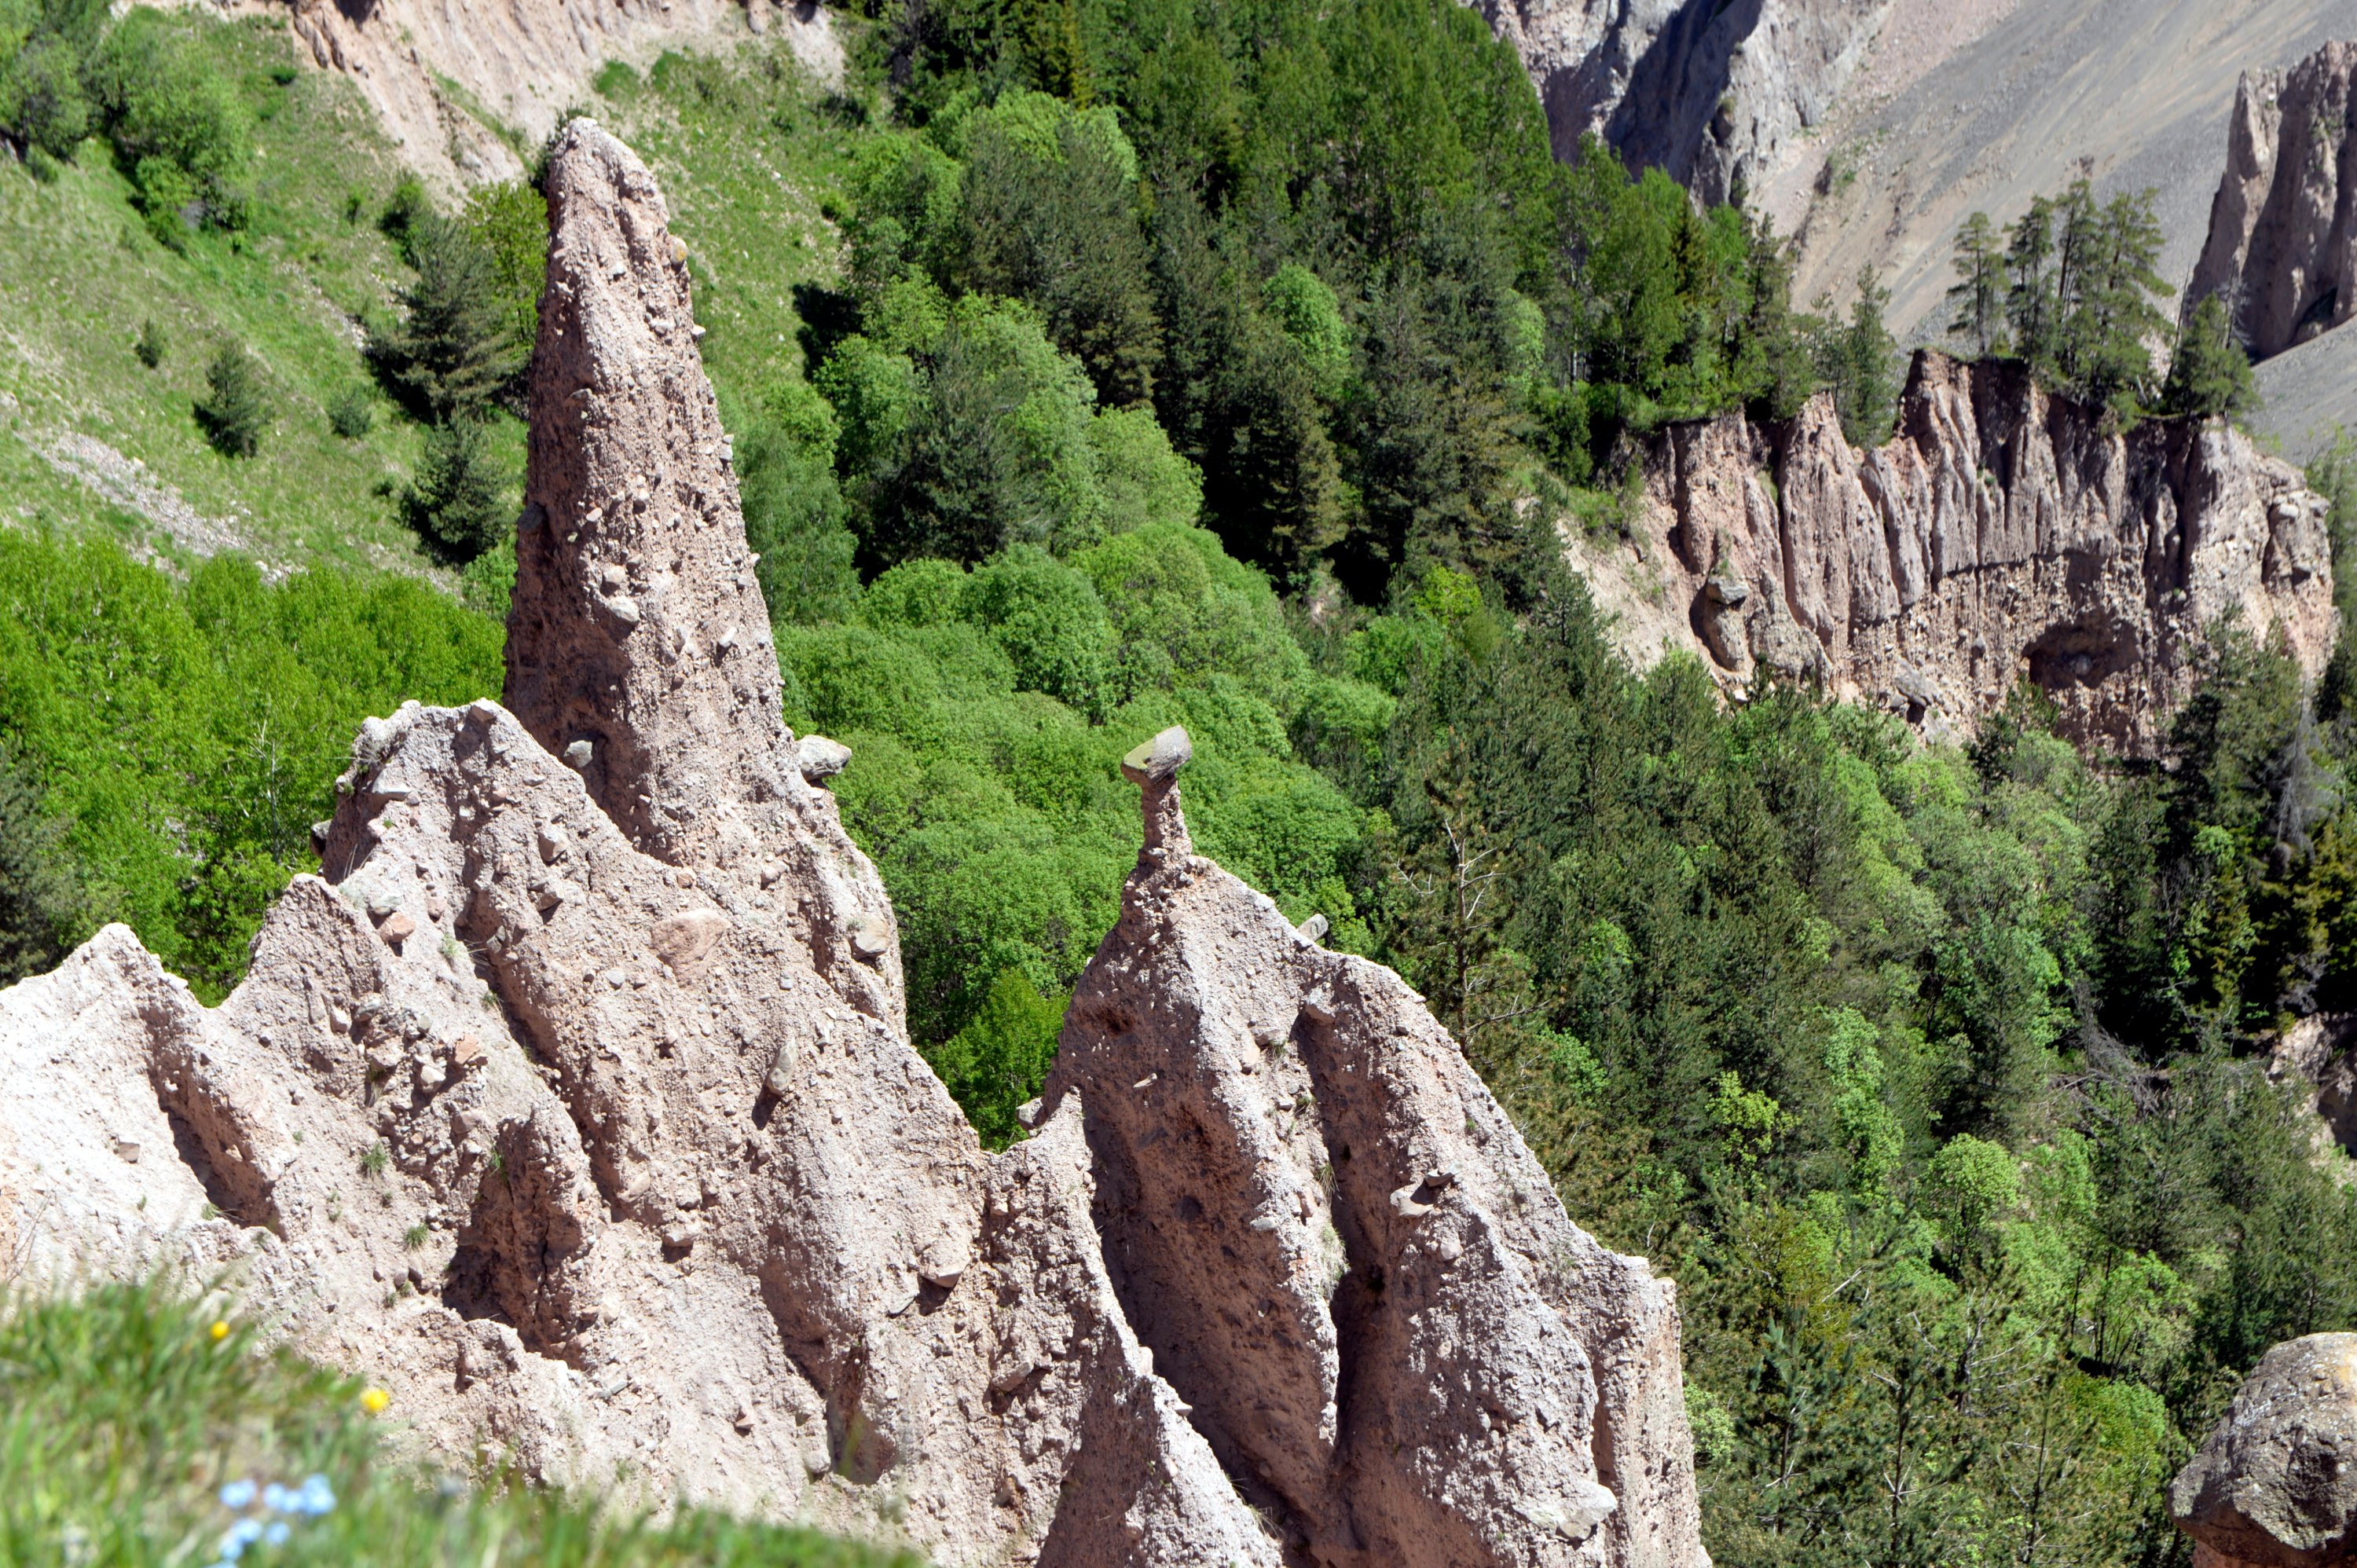 The fairy chimneys of the Hıram Valley are set to attract visitors from the region and abroad as the municipality develops the area to increase accessibility, Posof district, Ardahan province, Turkey, June 9, 2020. (AA Photo)